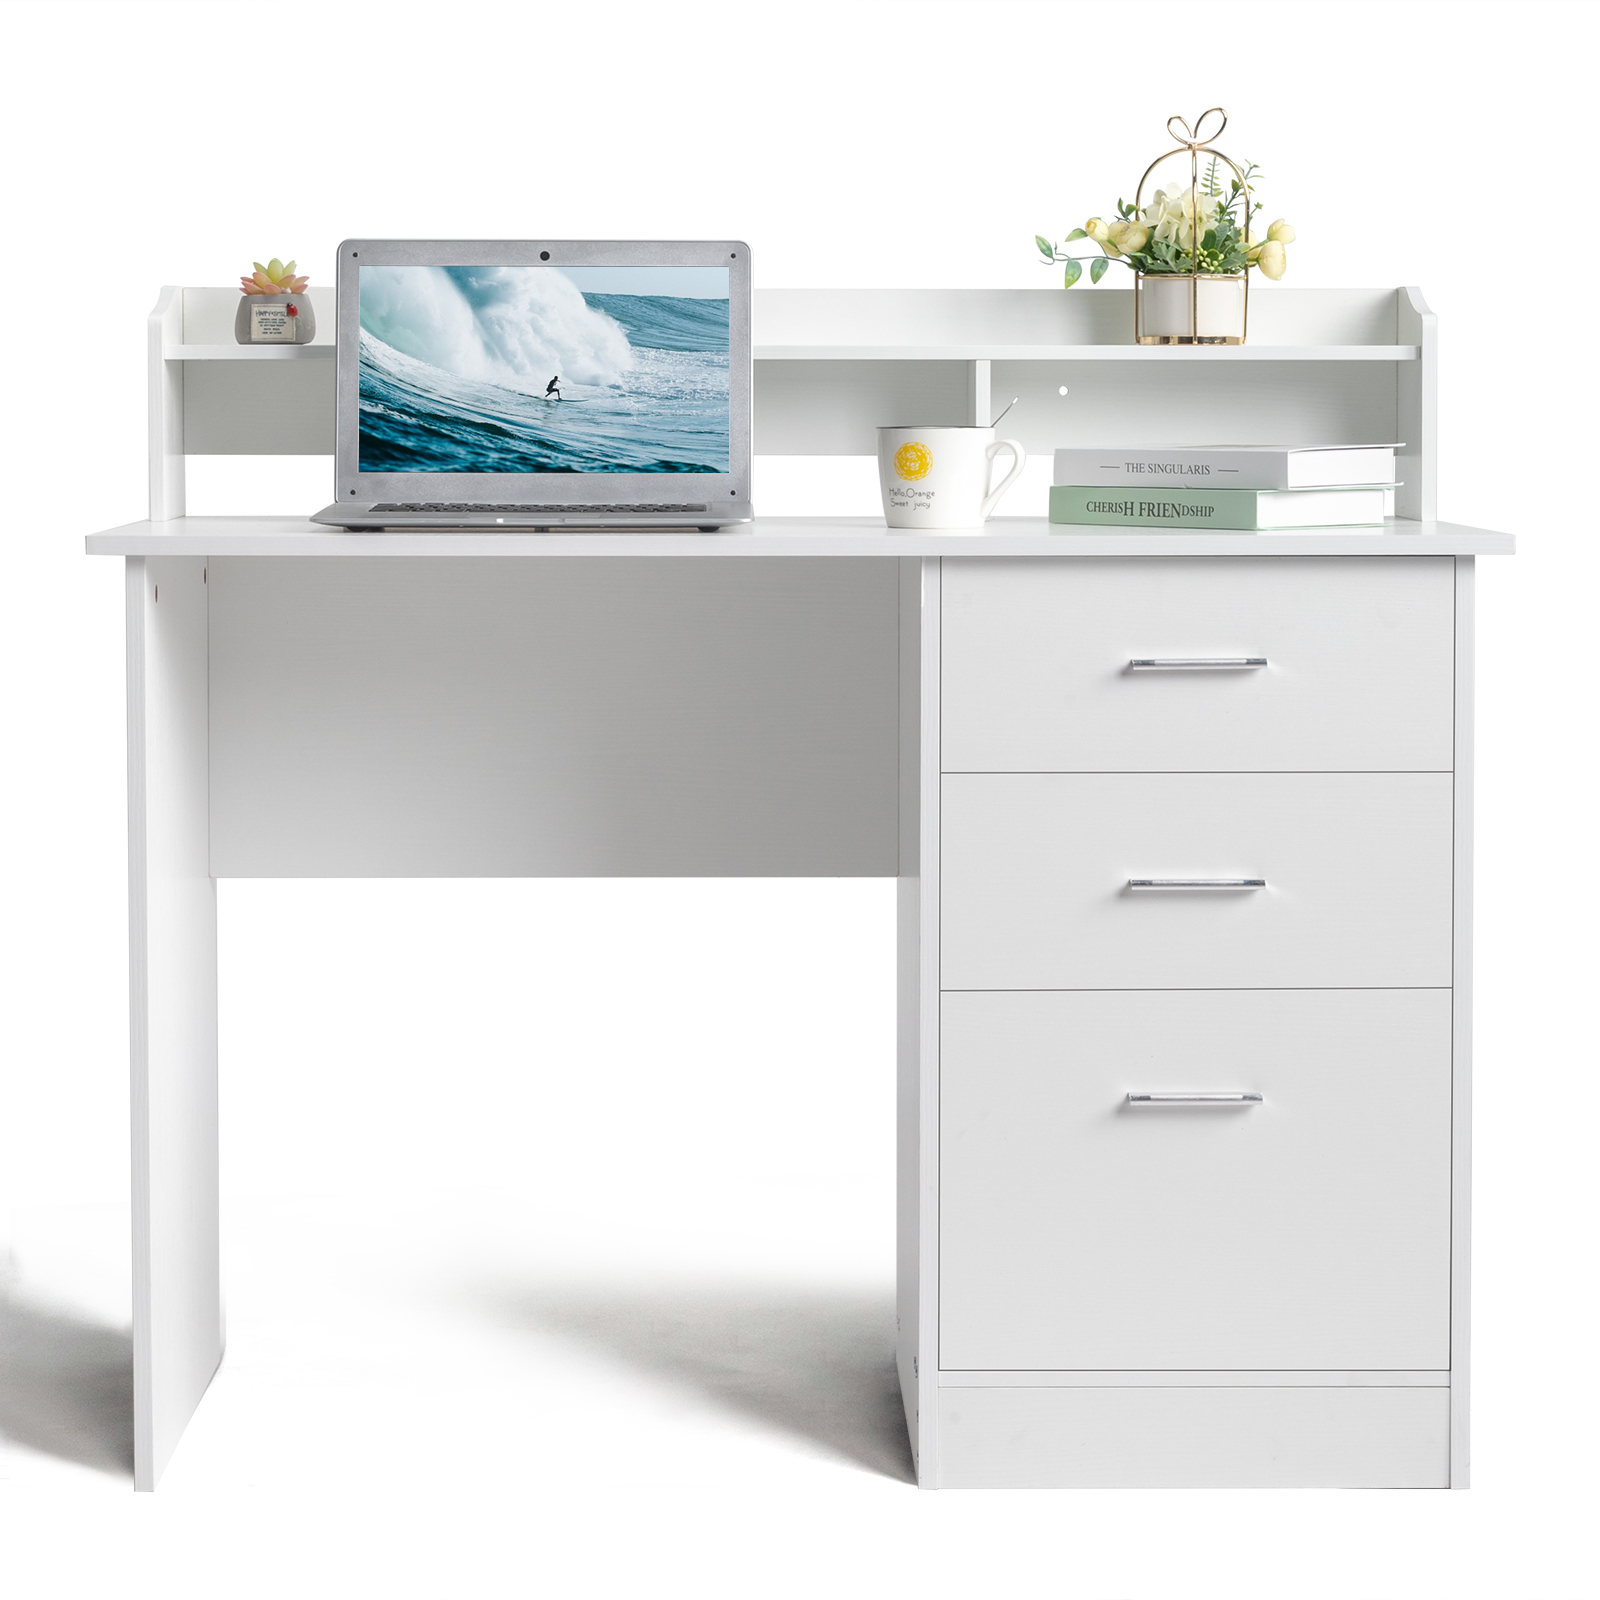 Ktaxon Wood Computer Desk Office Laptop PC Work Table, Writing Desk with 3 Drawers File Cabinet for Letter Size,White - image 4 of 10